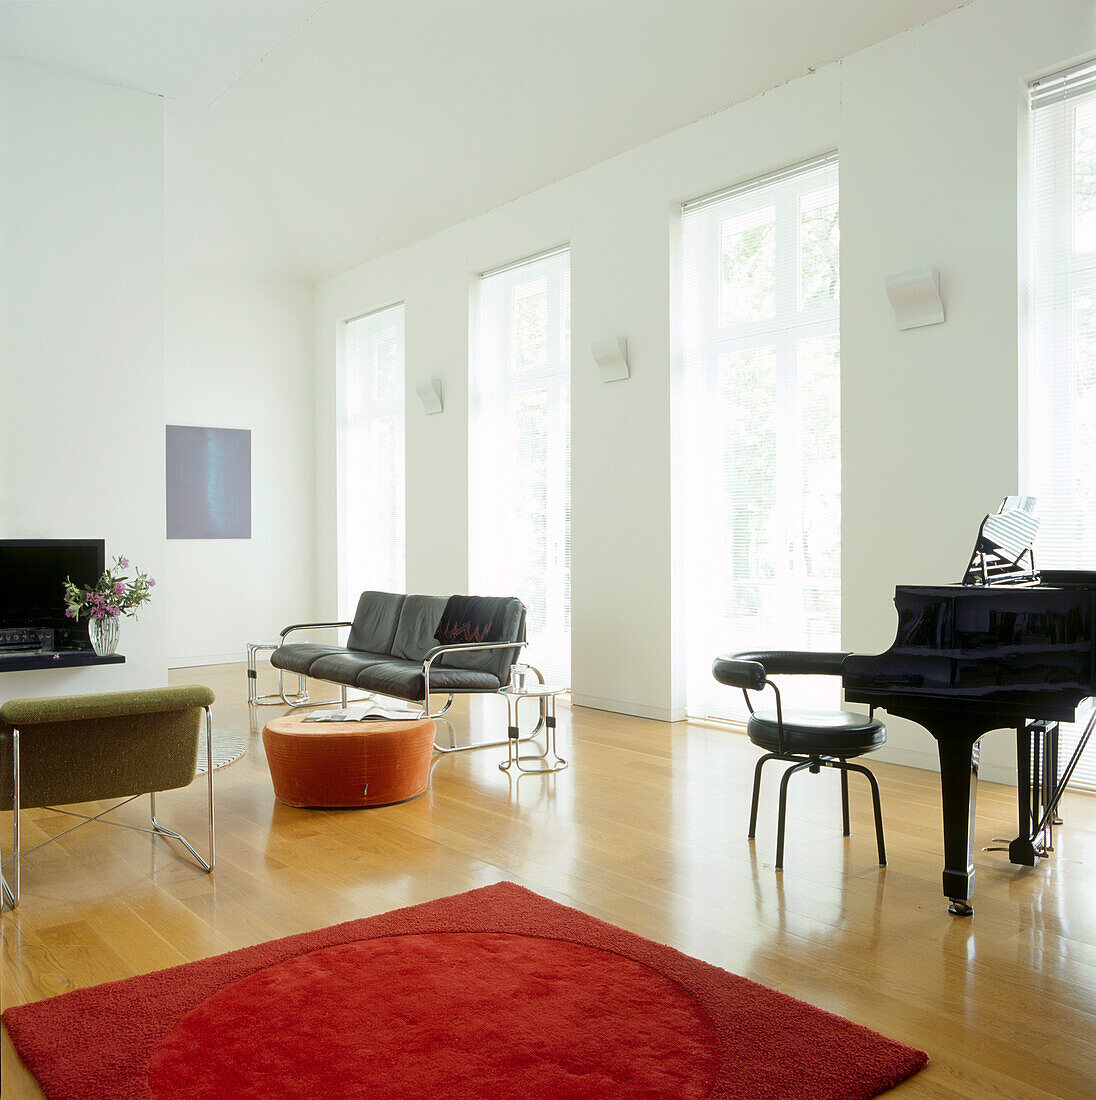 Bright and spacious living space with grand piano and modern black leather furniture